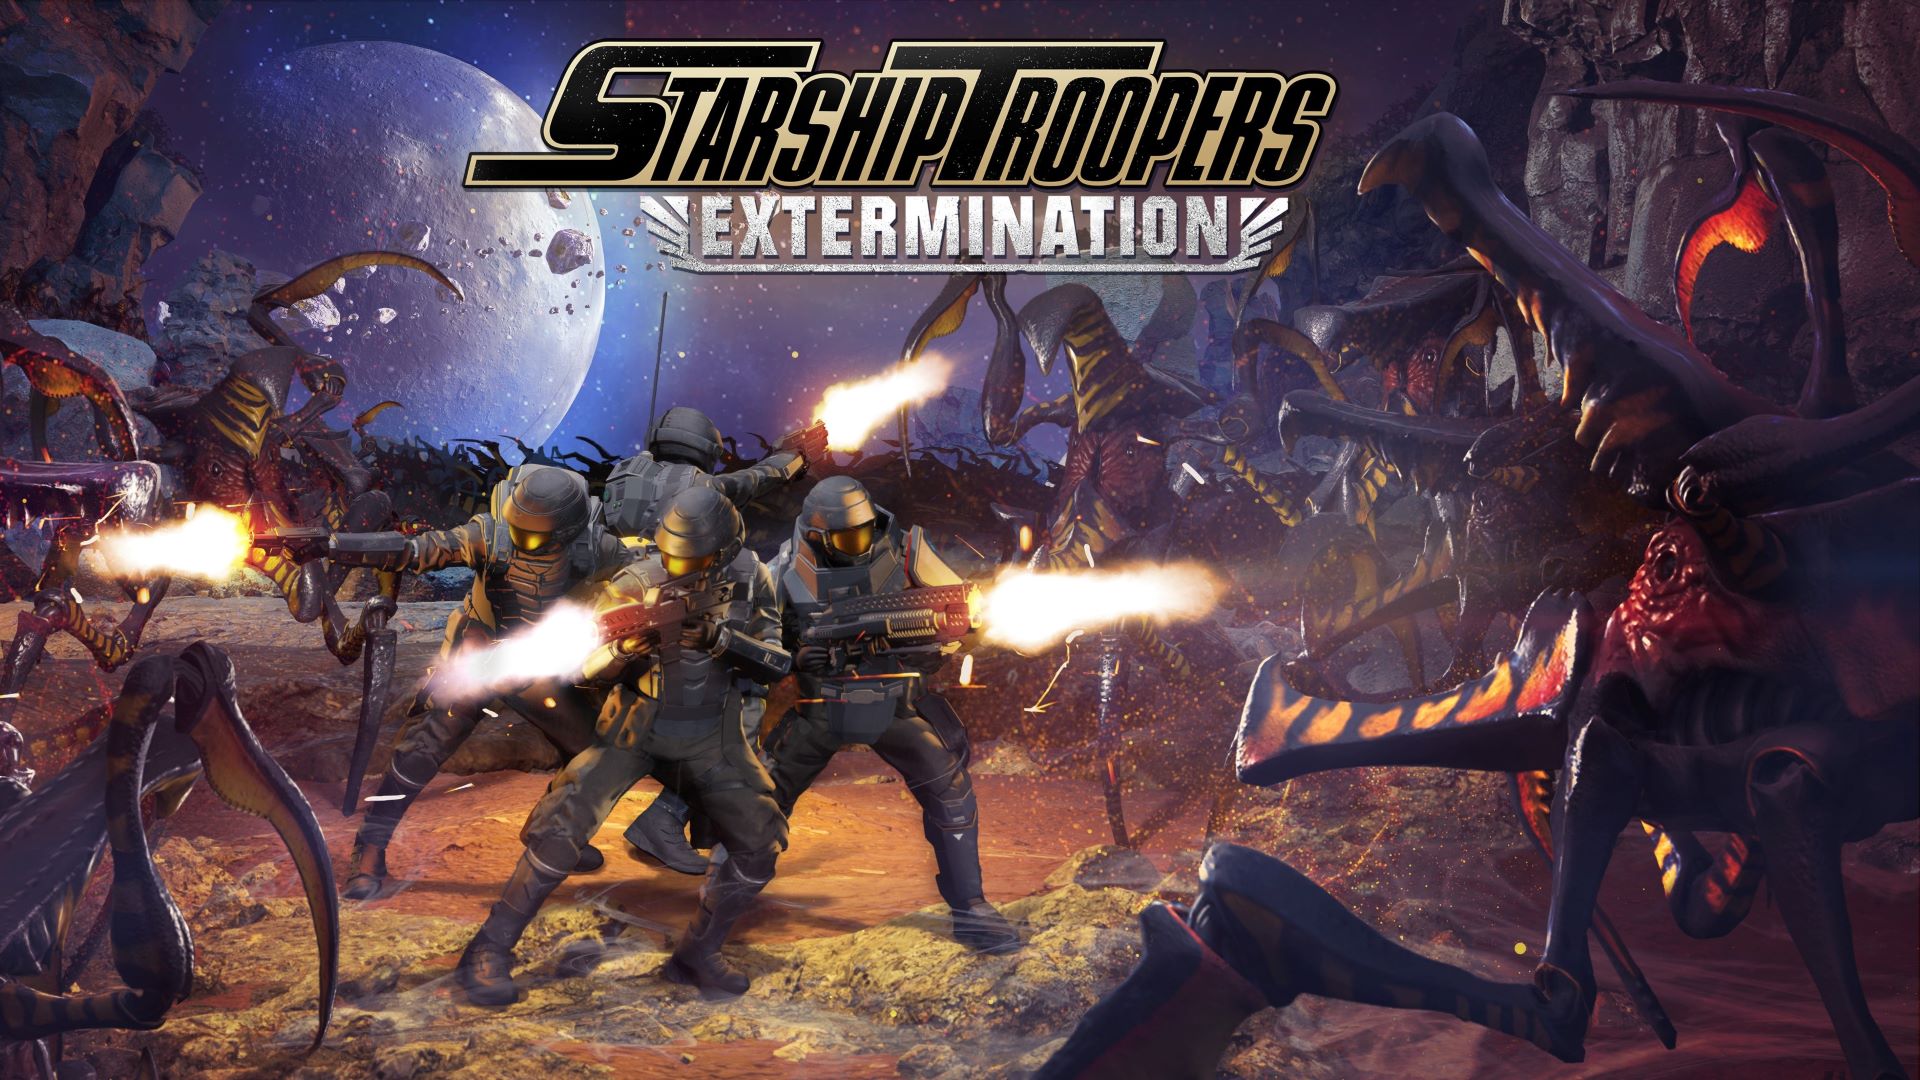 Starship Troopers: Extermination pits 12 players against the arachnid horde